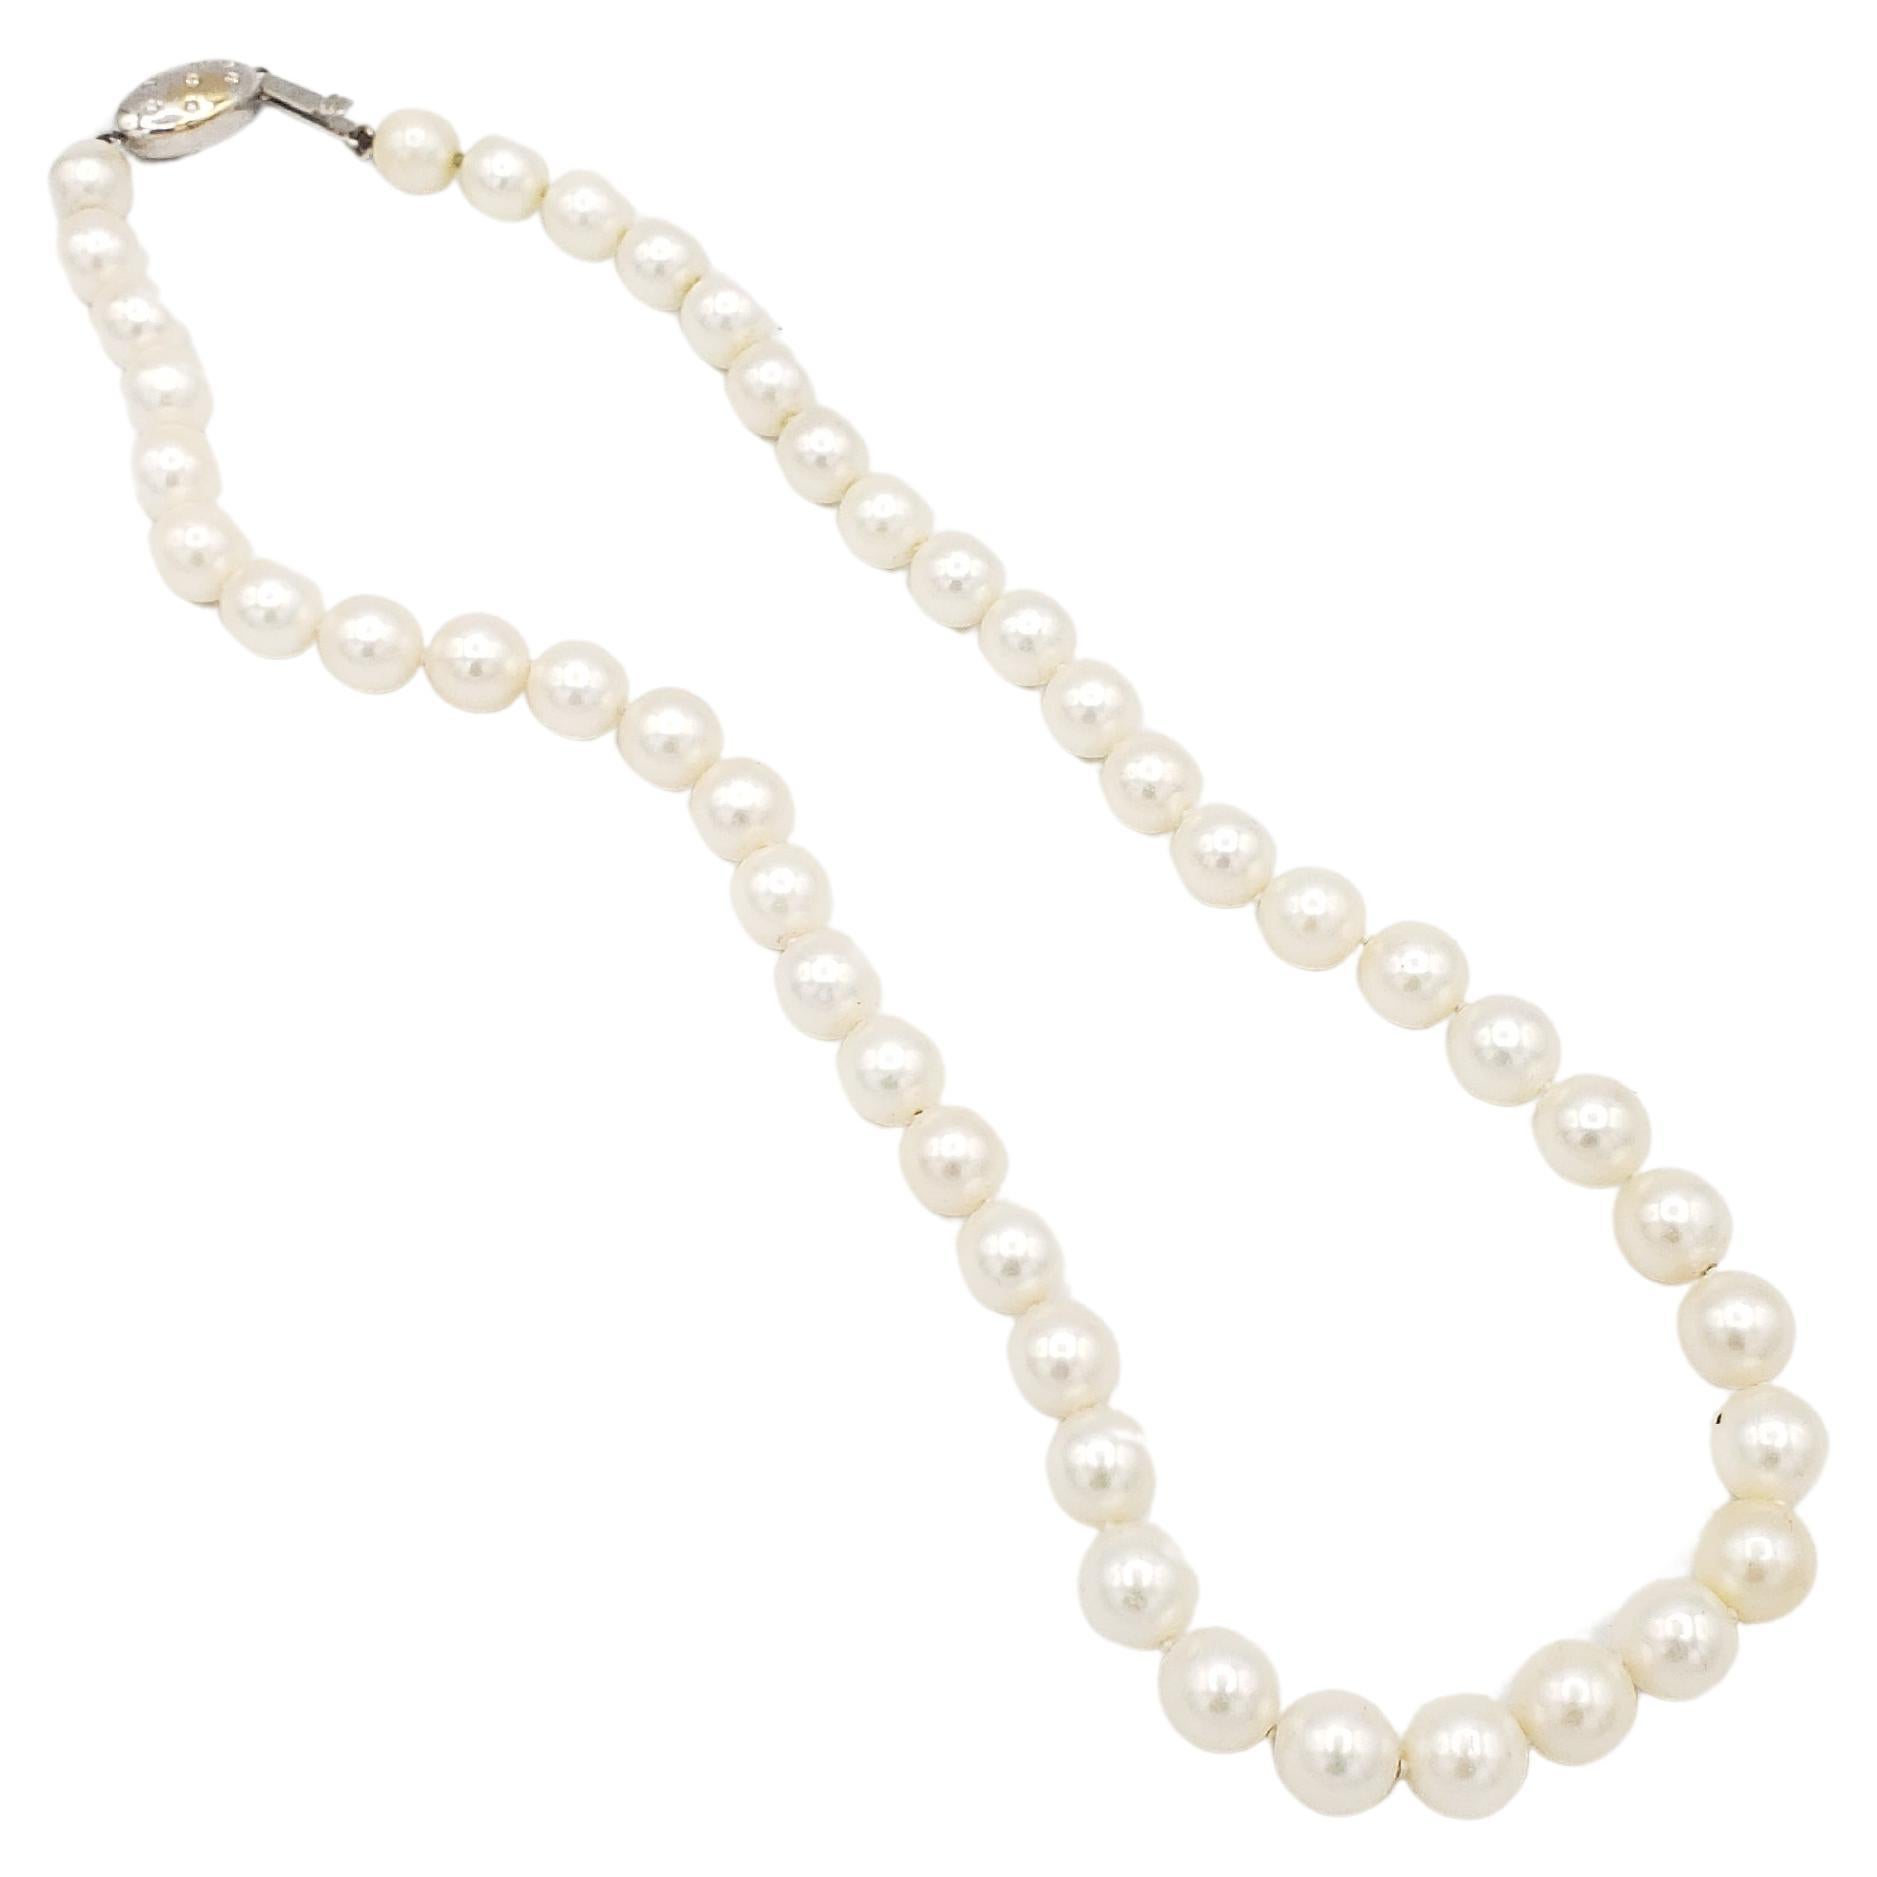 NEW AAA+ Quality Japanese Akoya Salt Water White Pearl Necklace